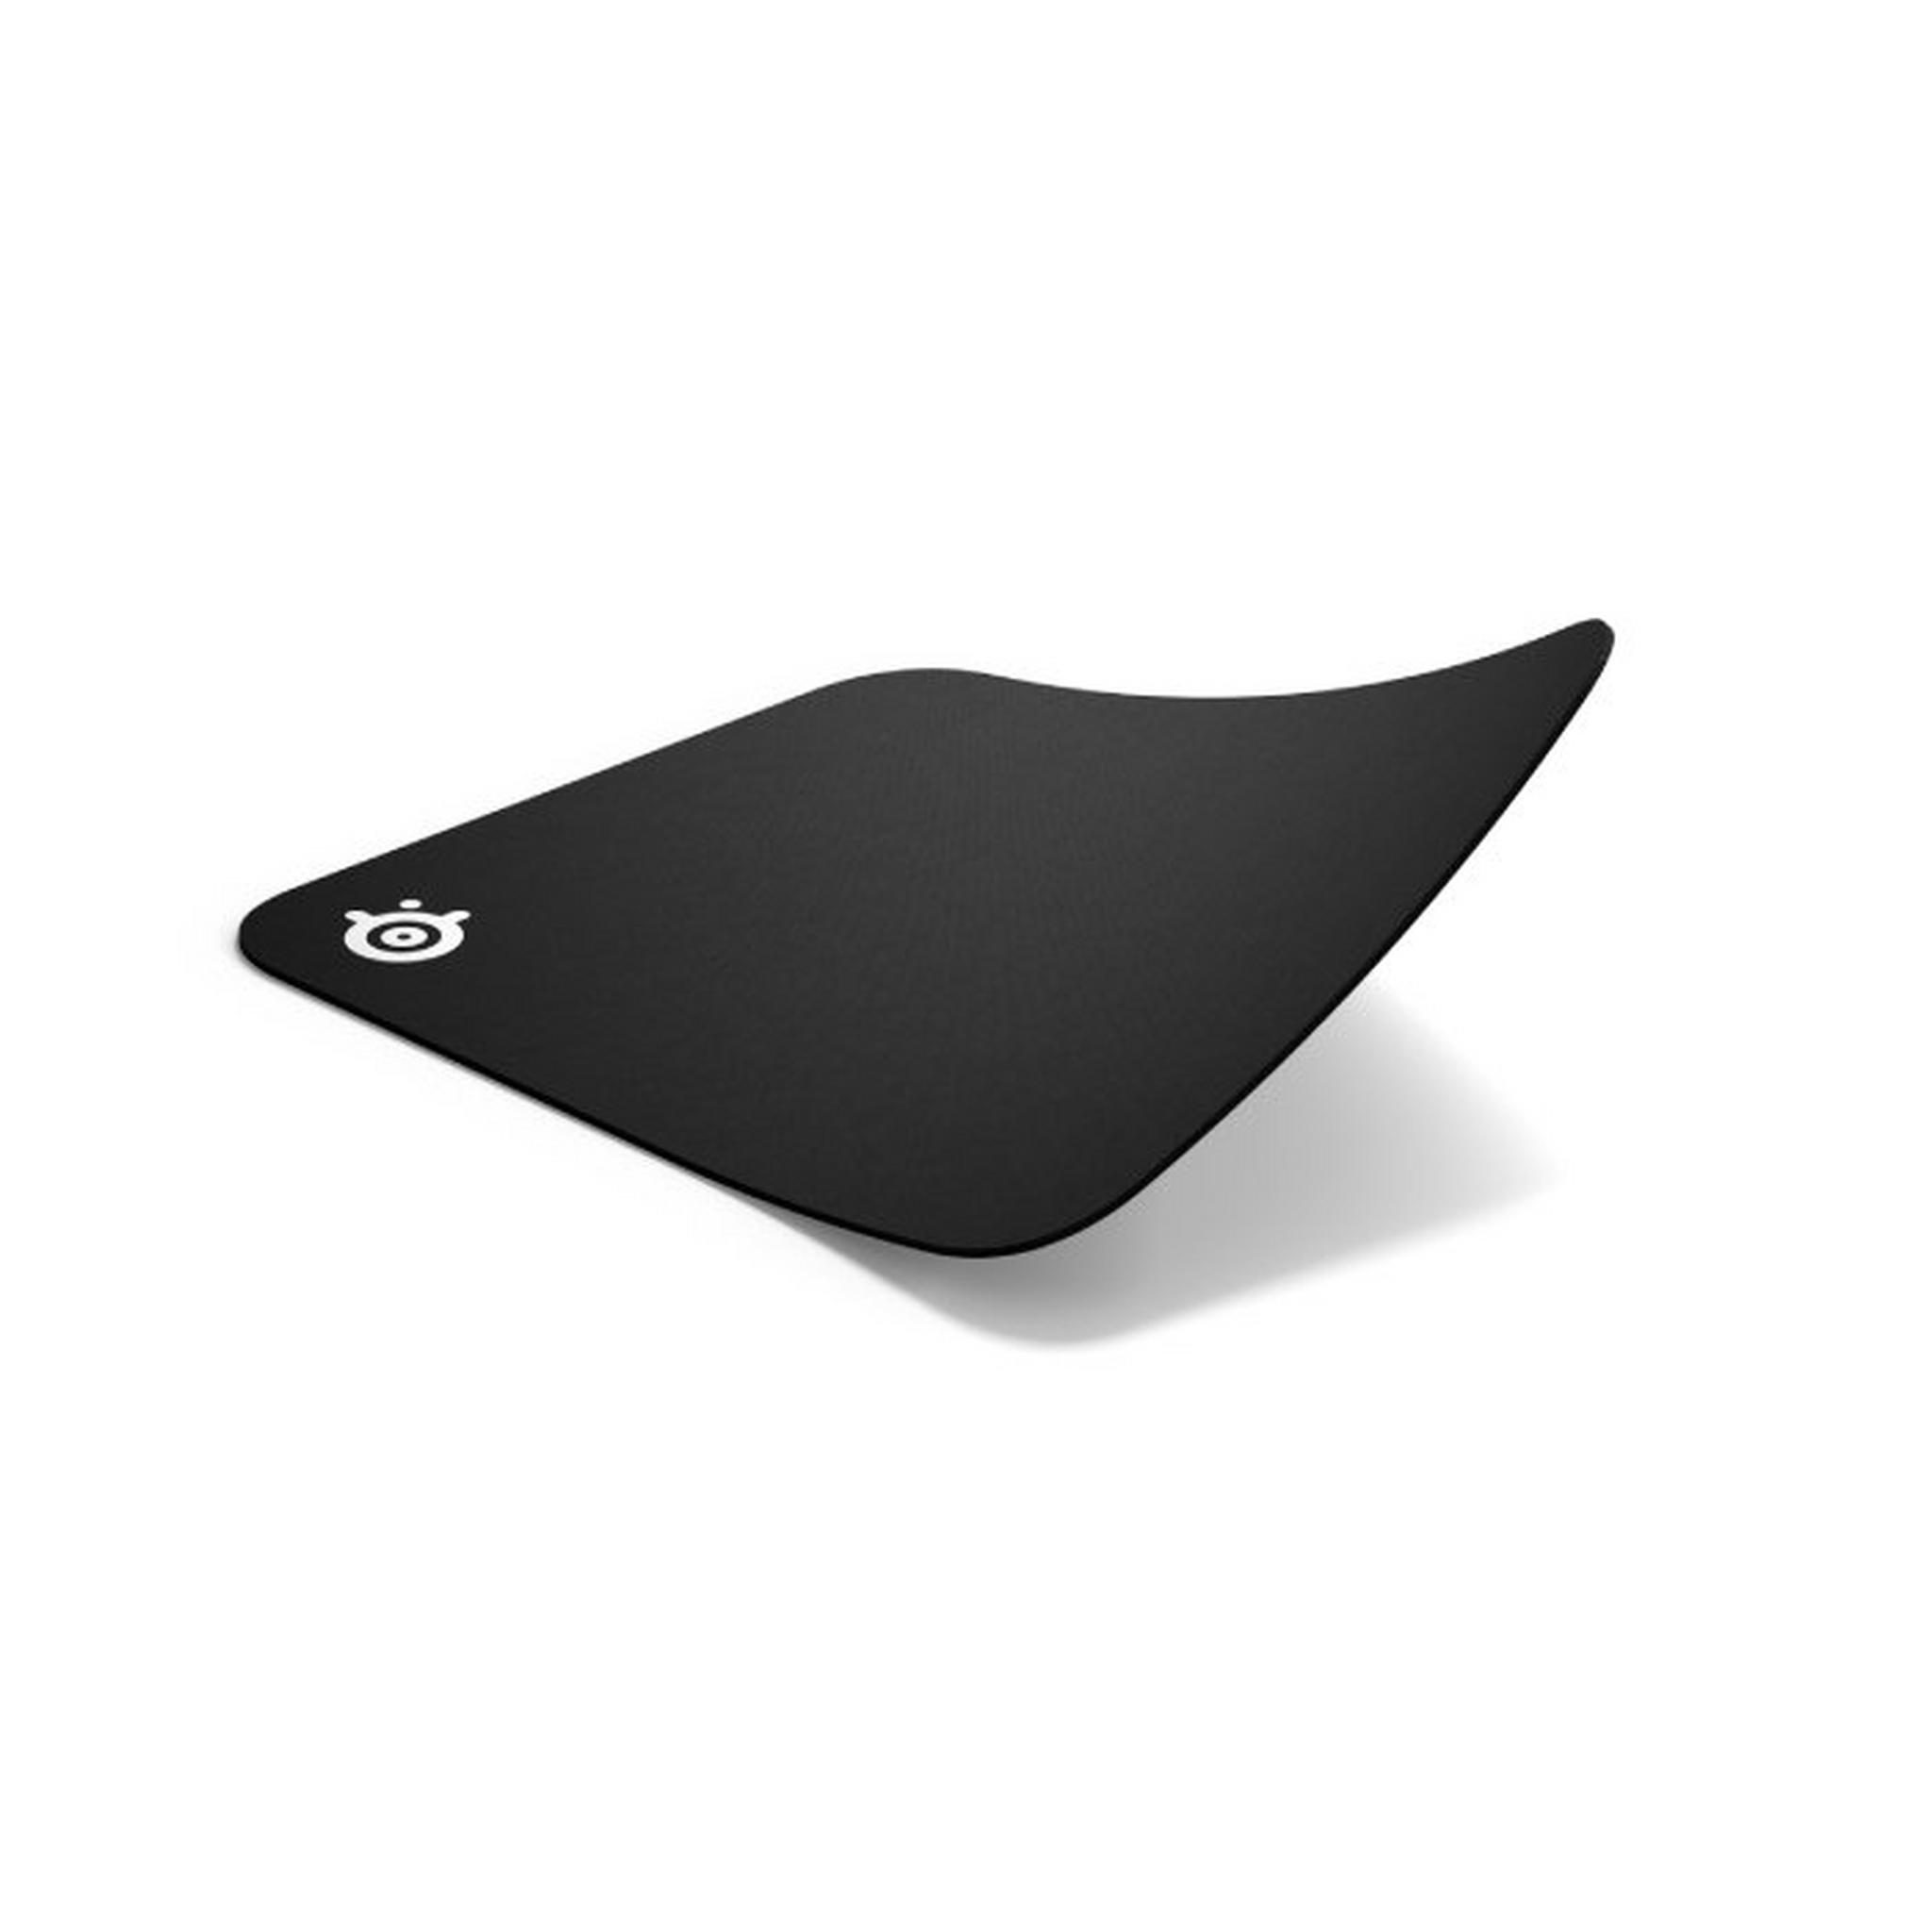 SteelSeries QcK Mini Surface Mousepad For PC